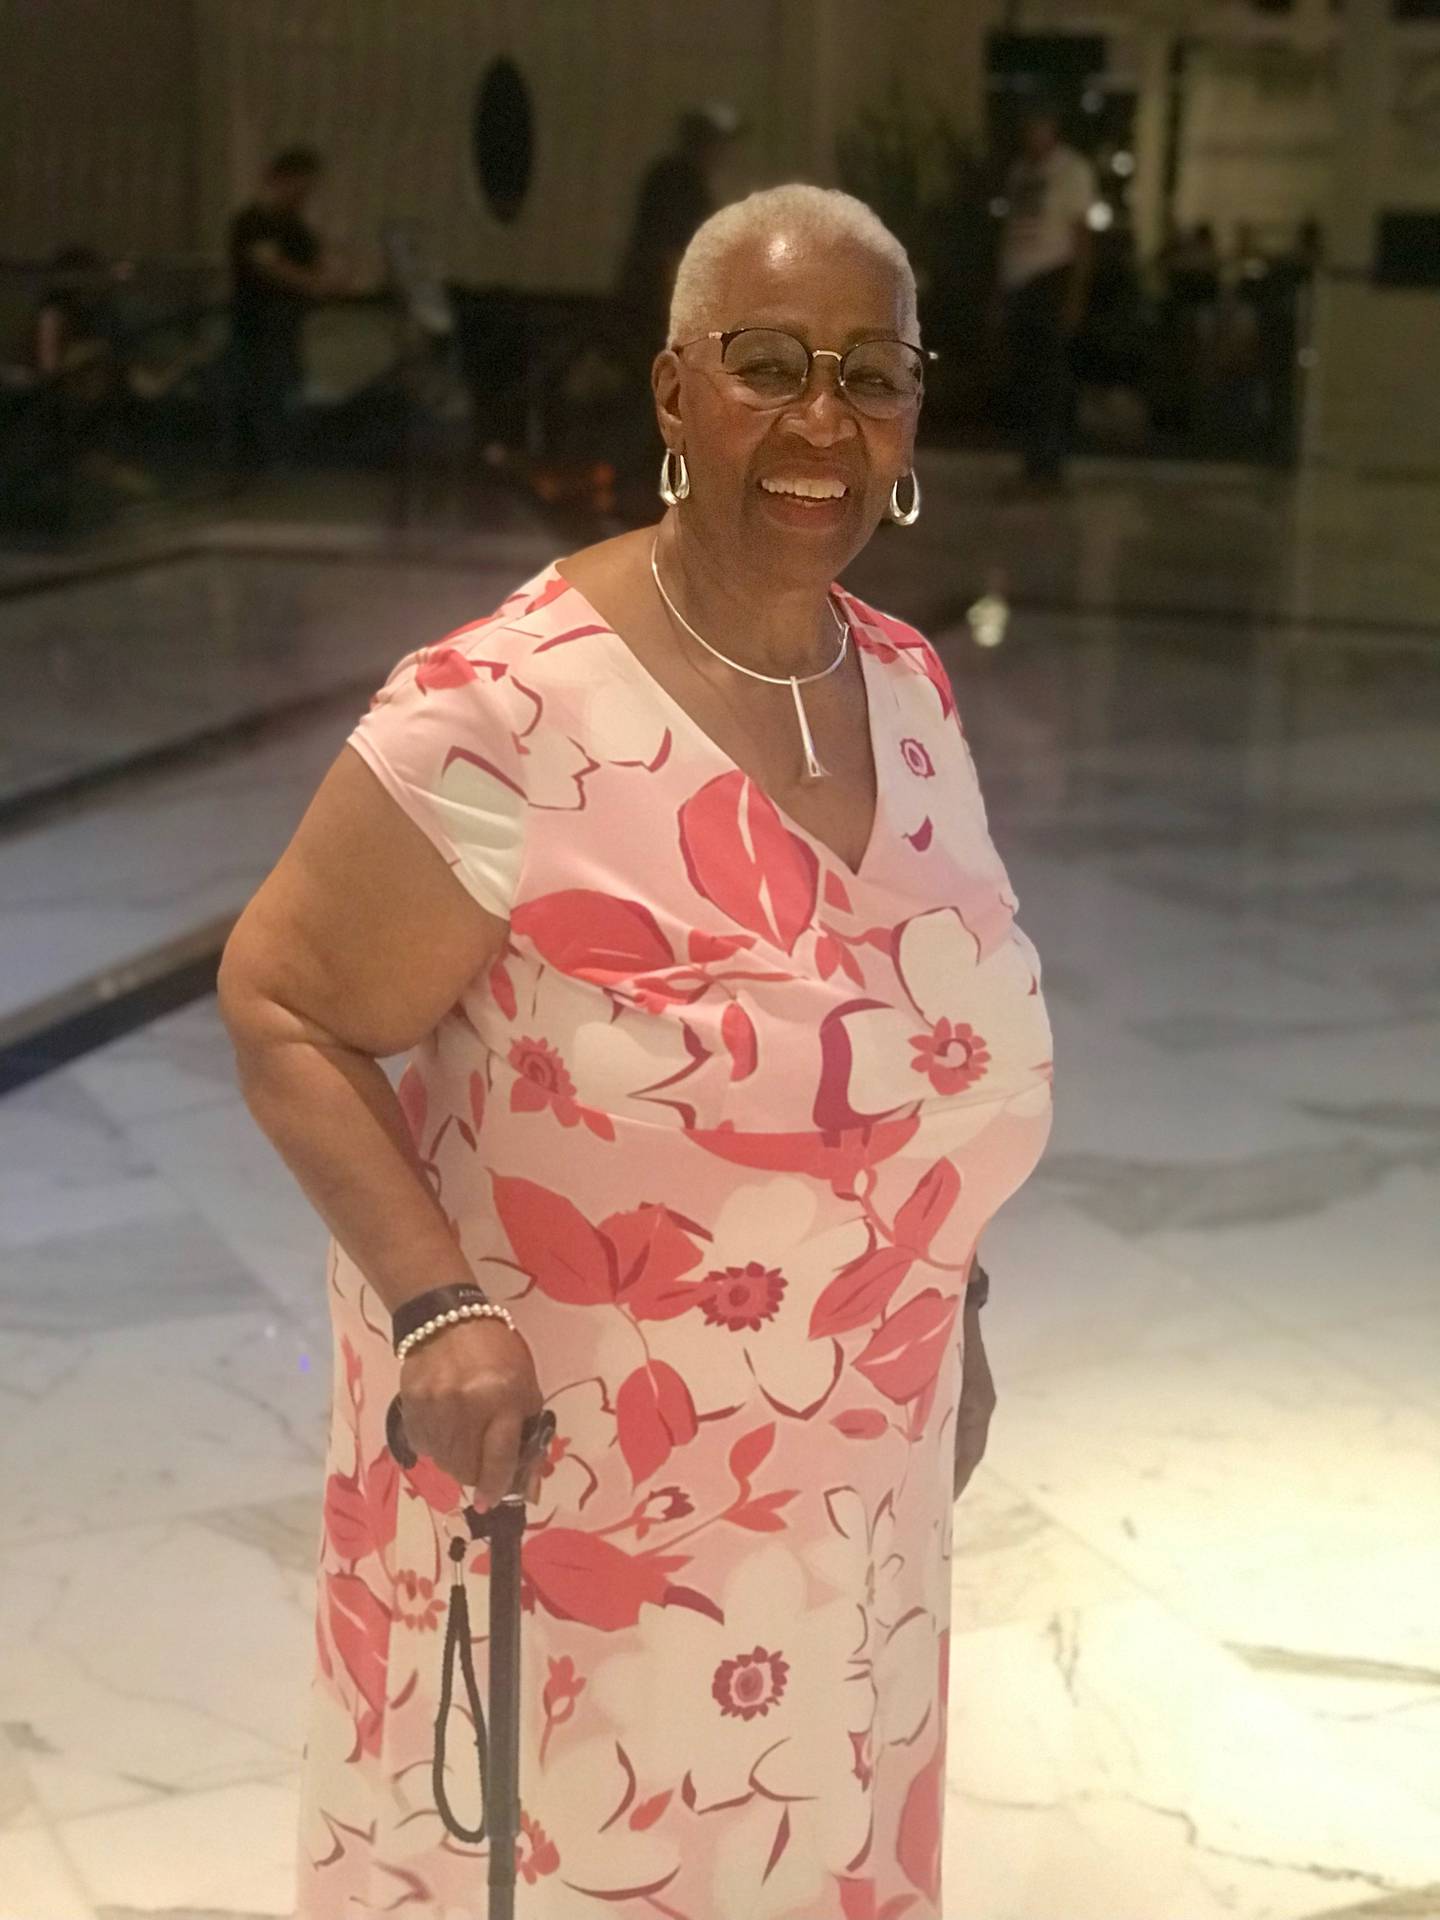 Vera Dorsey has been a member of Bethel AME since she was a child. She's been teaching church school for over 45 years and has fond memories of the junior choir, altar guild, and junior ushers.